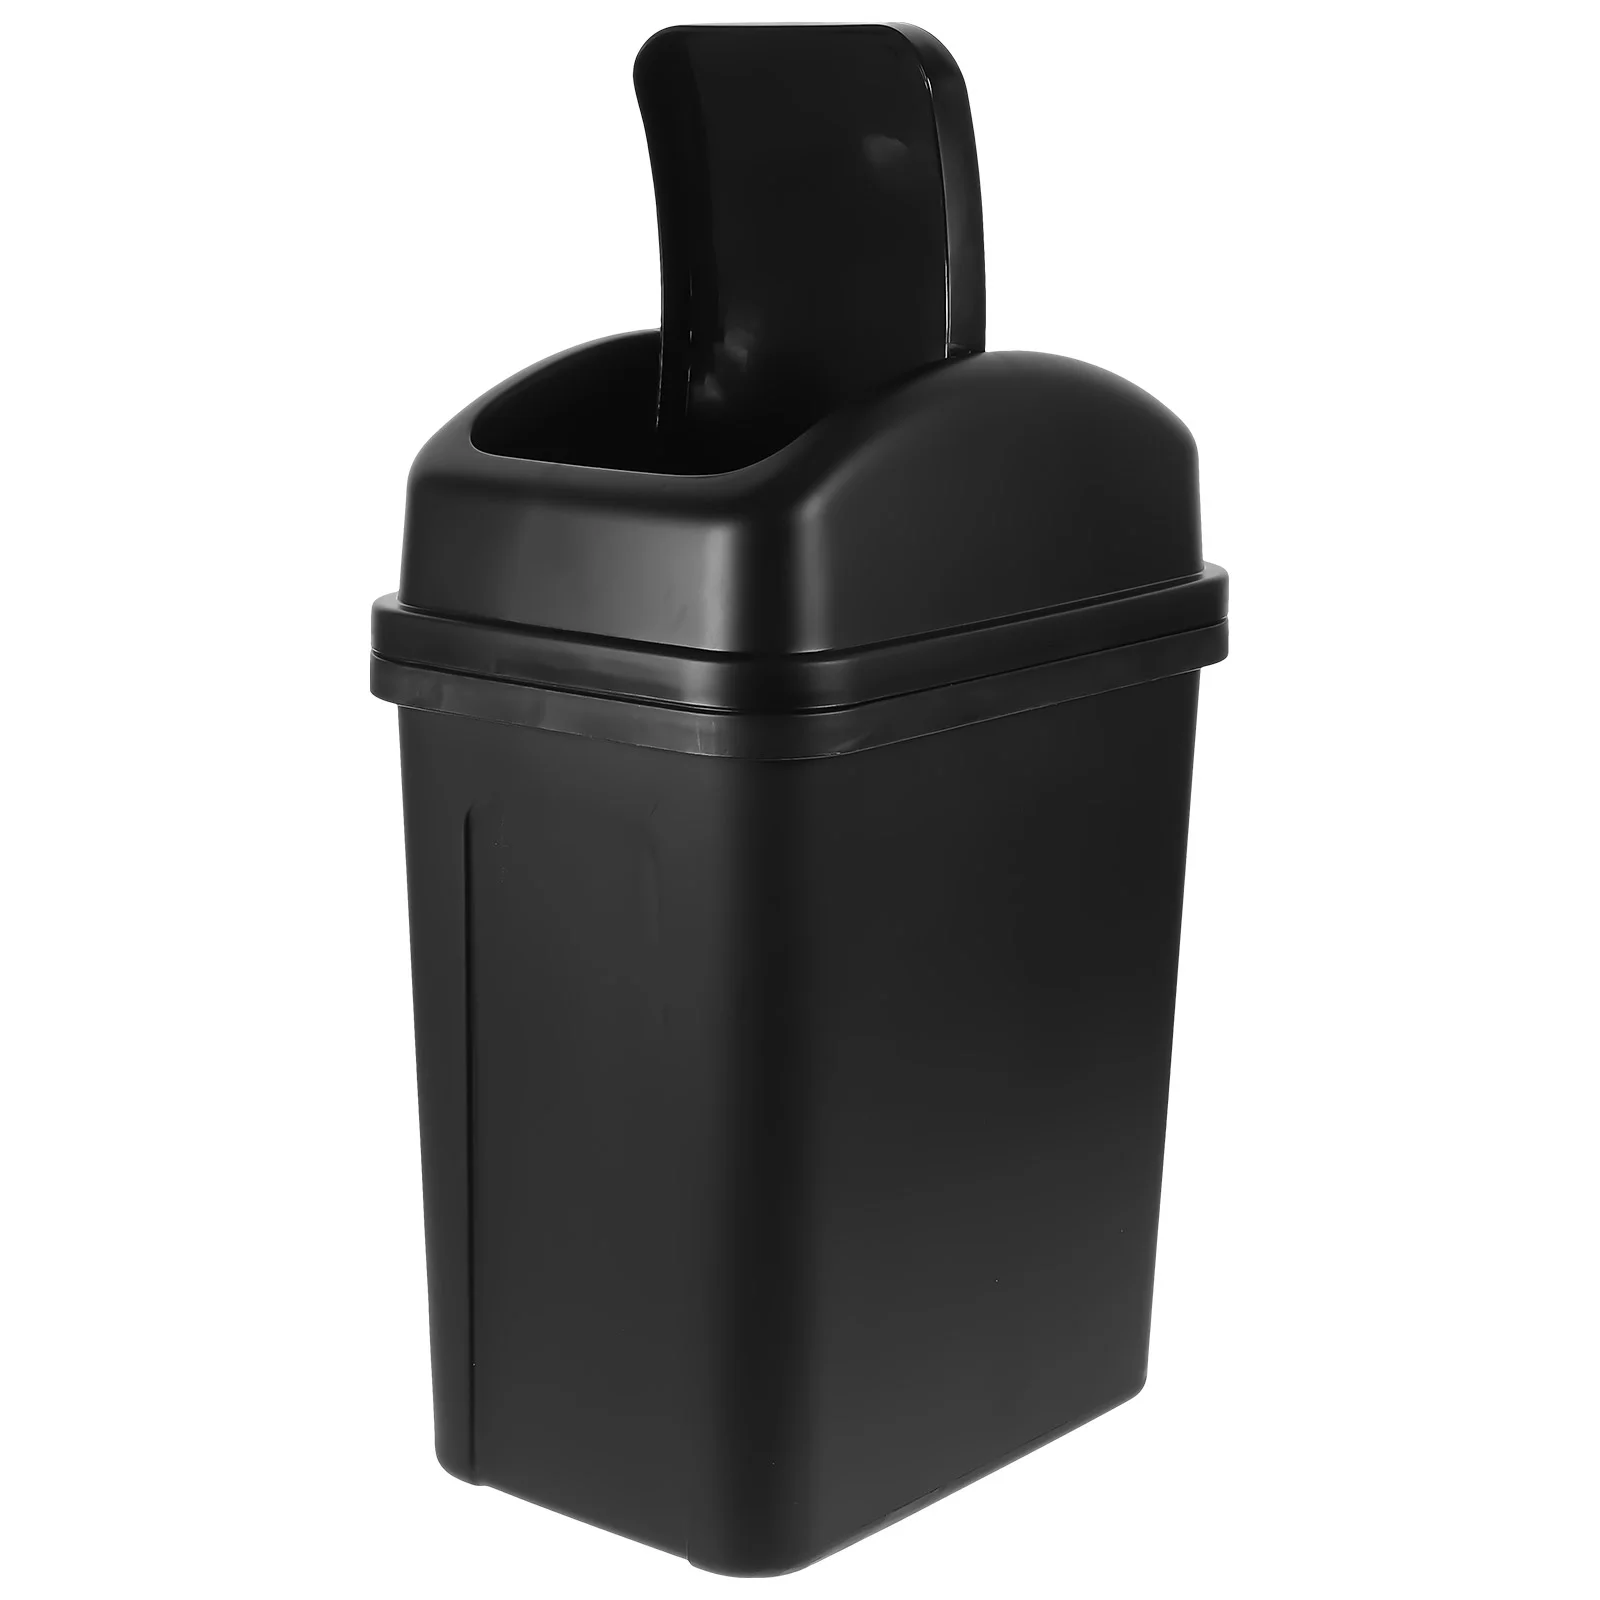 

Small Trash Can Lid 1.8 Gallon Thicken Plastic Garbage Can Slim Waste Bin Compact Rubbish Container Bucket Bathroom Kitchen